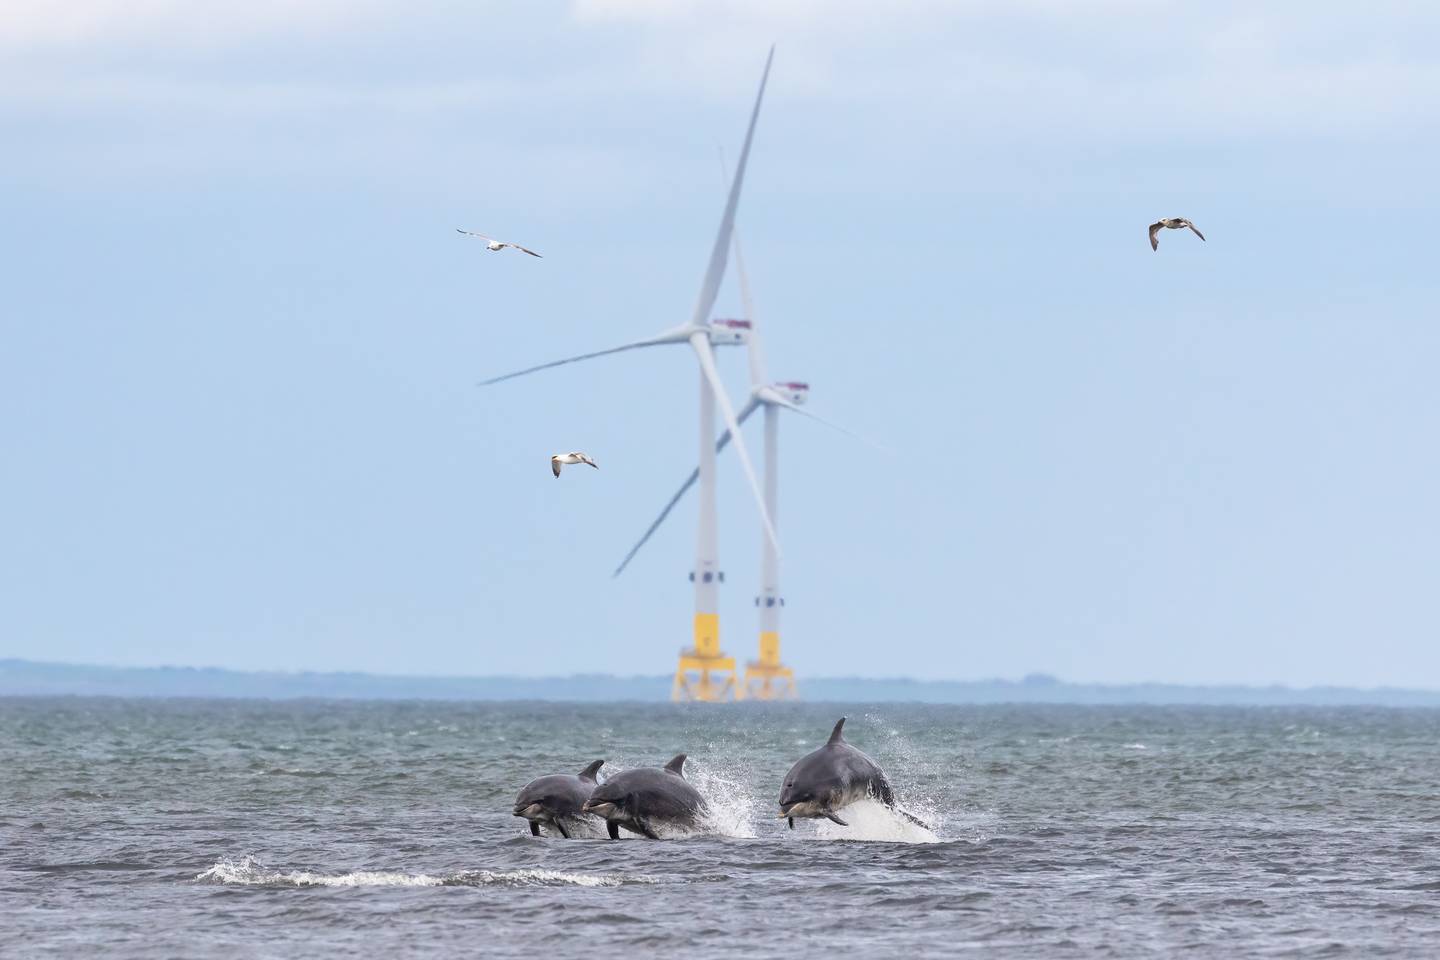 Aberdeen is seeking to swap its oil crown for one of renewables as it seeks to become Europe’s champion of green technology. Photo: Ian Hastie via AREG 